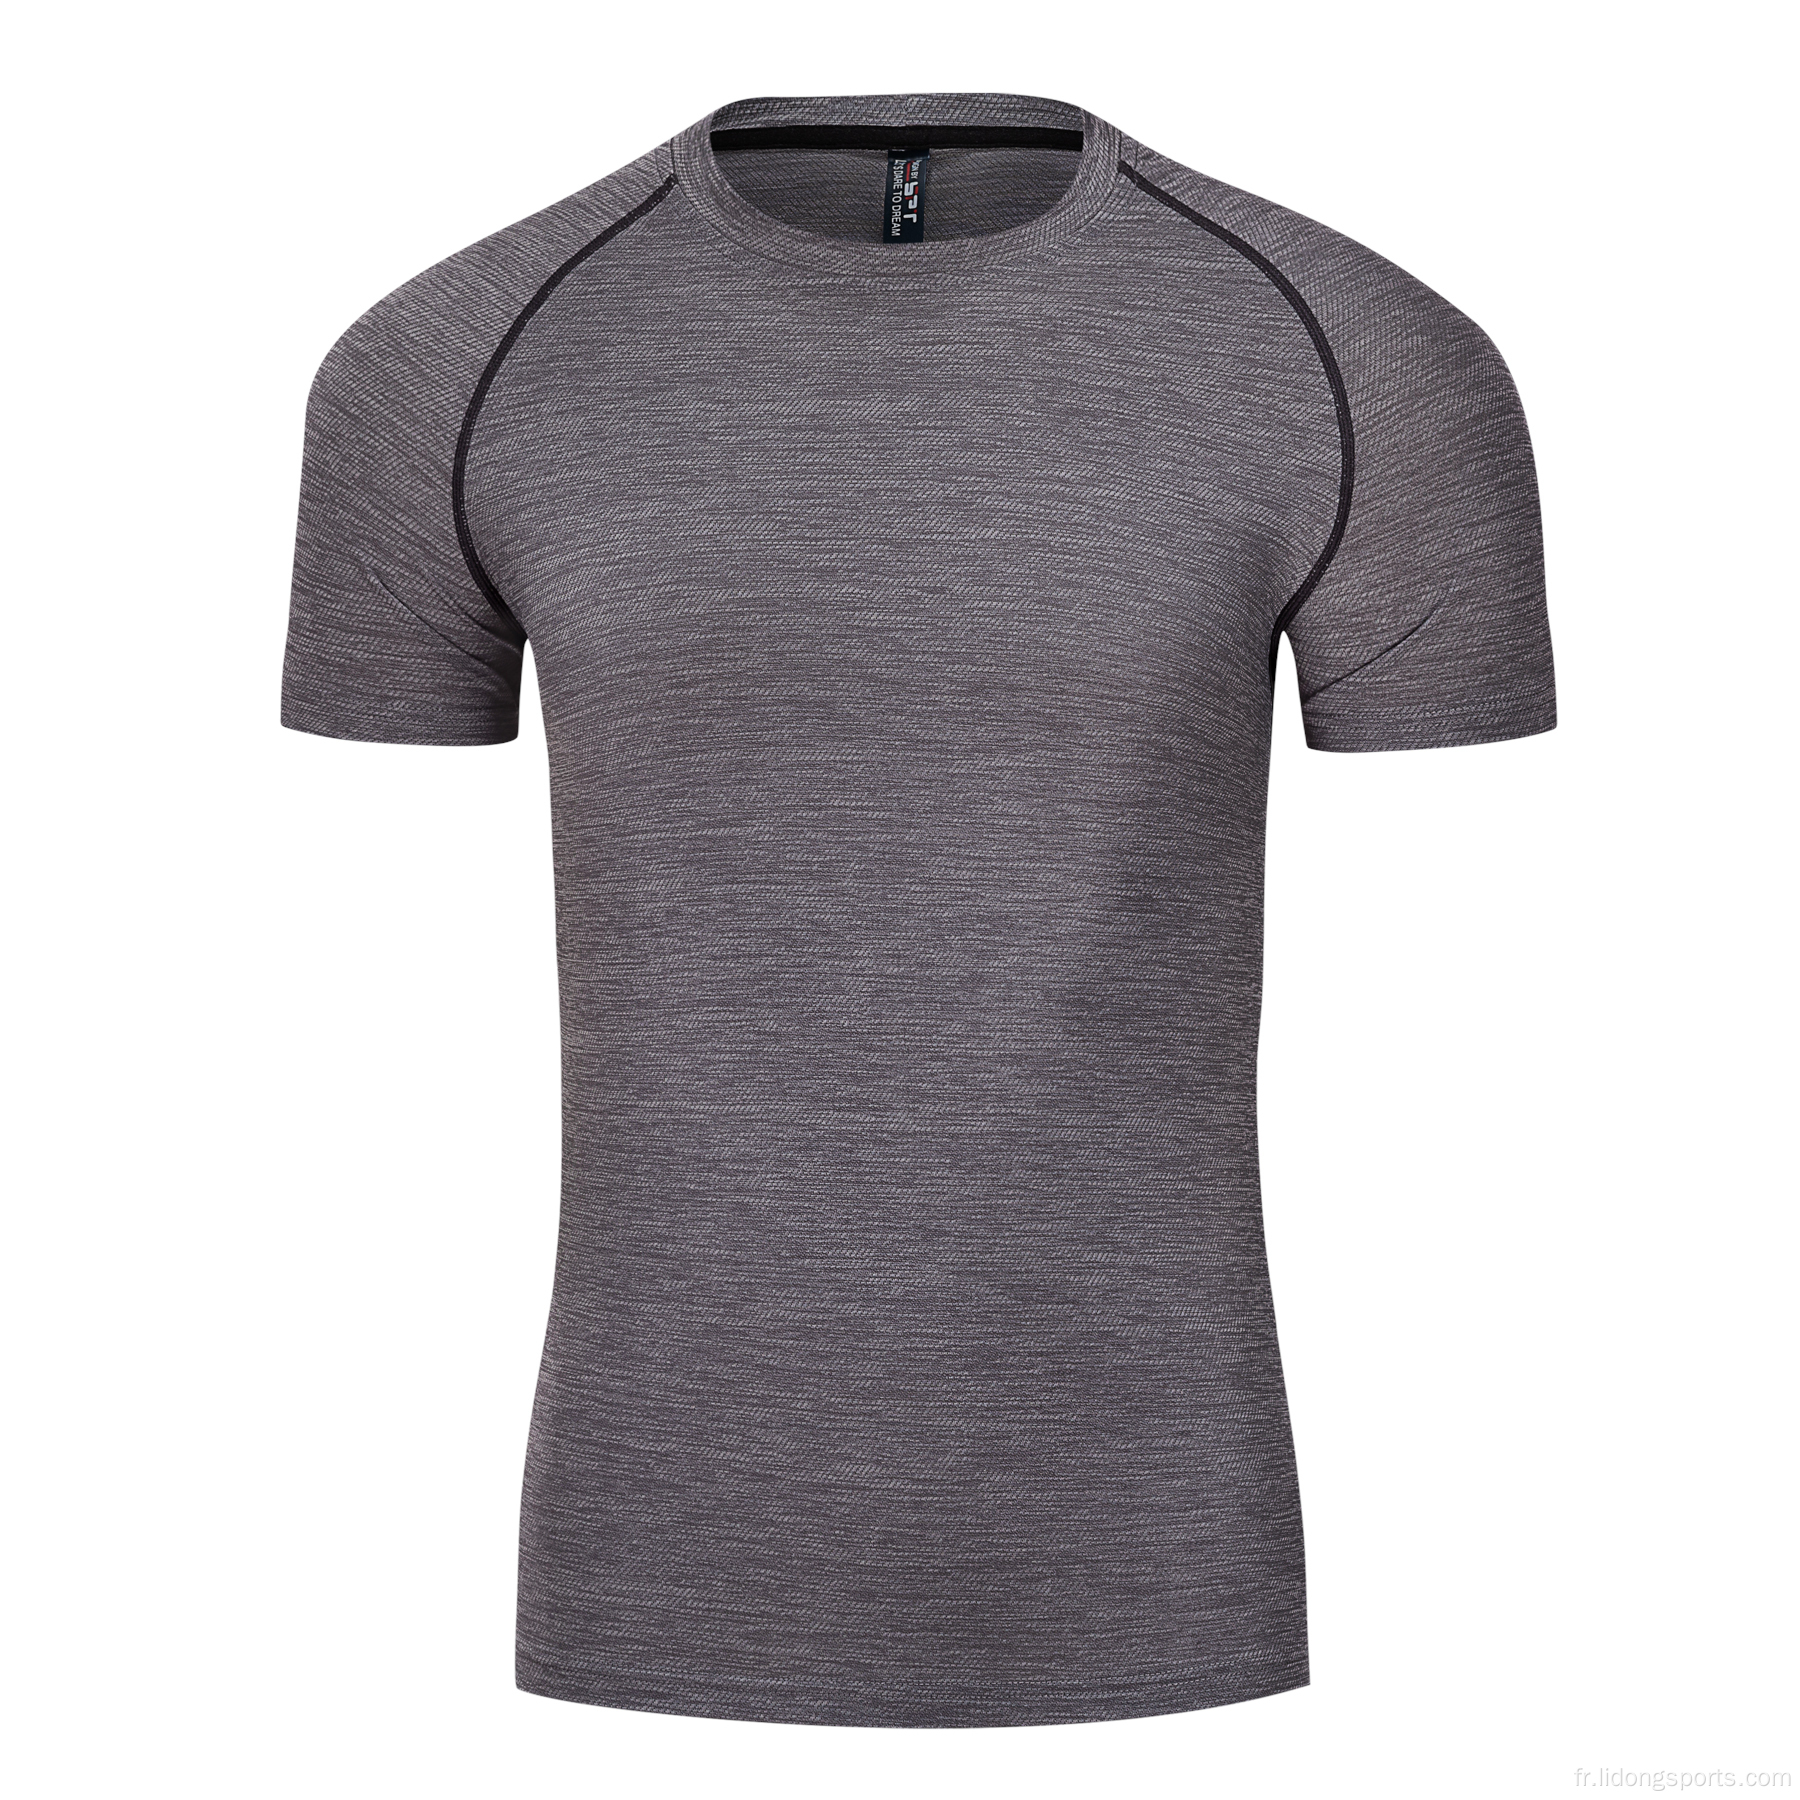 Hommes coulant T-shirt Shirt Fitness Sch Fitness